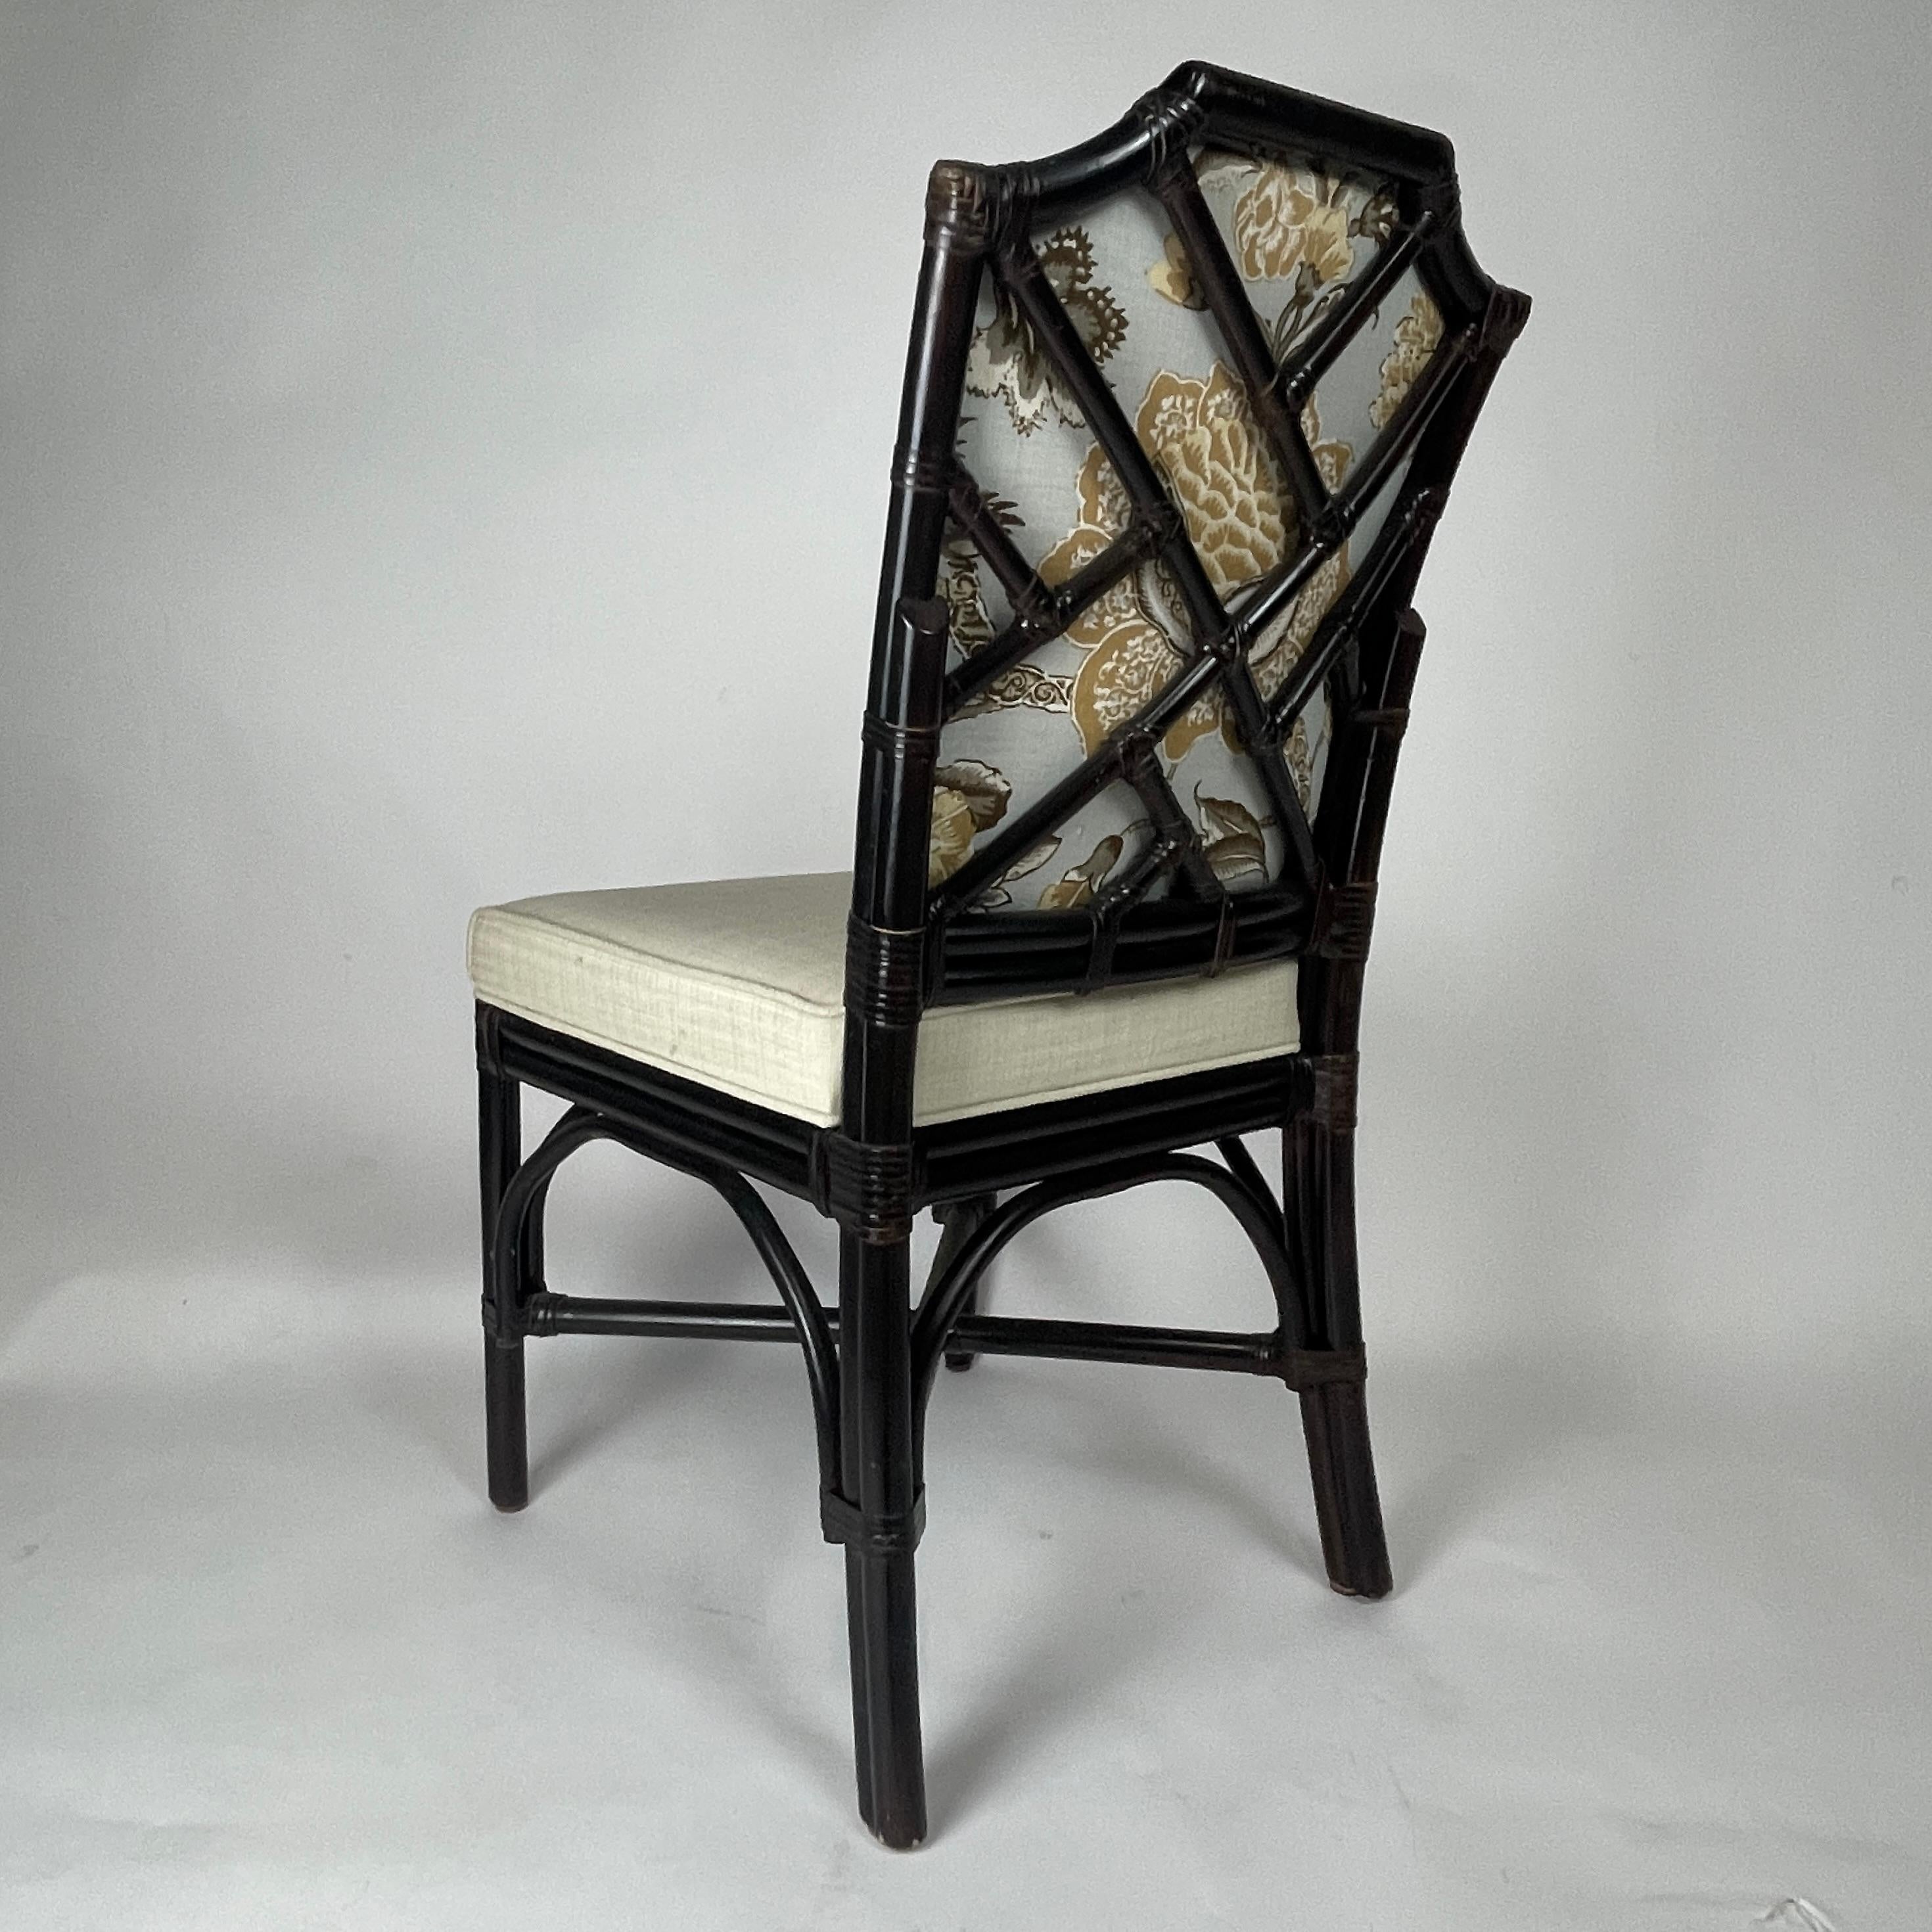 20th Century 6 Chinoiserie Bamboo Rattan Chinese Chippendale Dining Chairs 12 Available